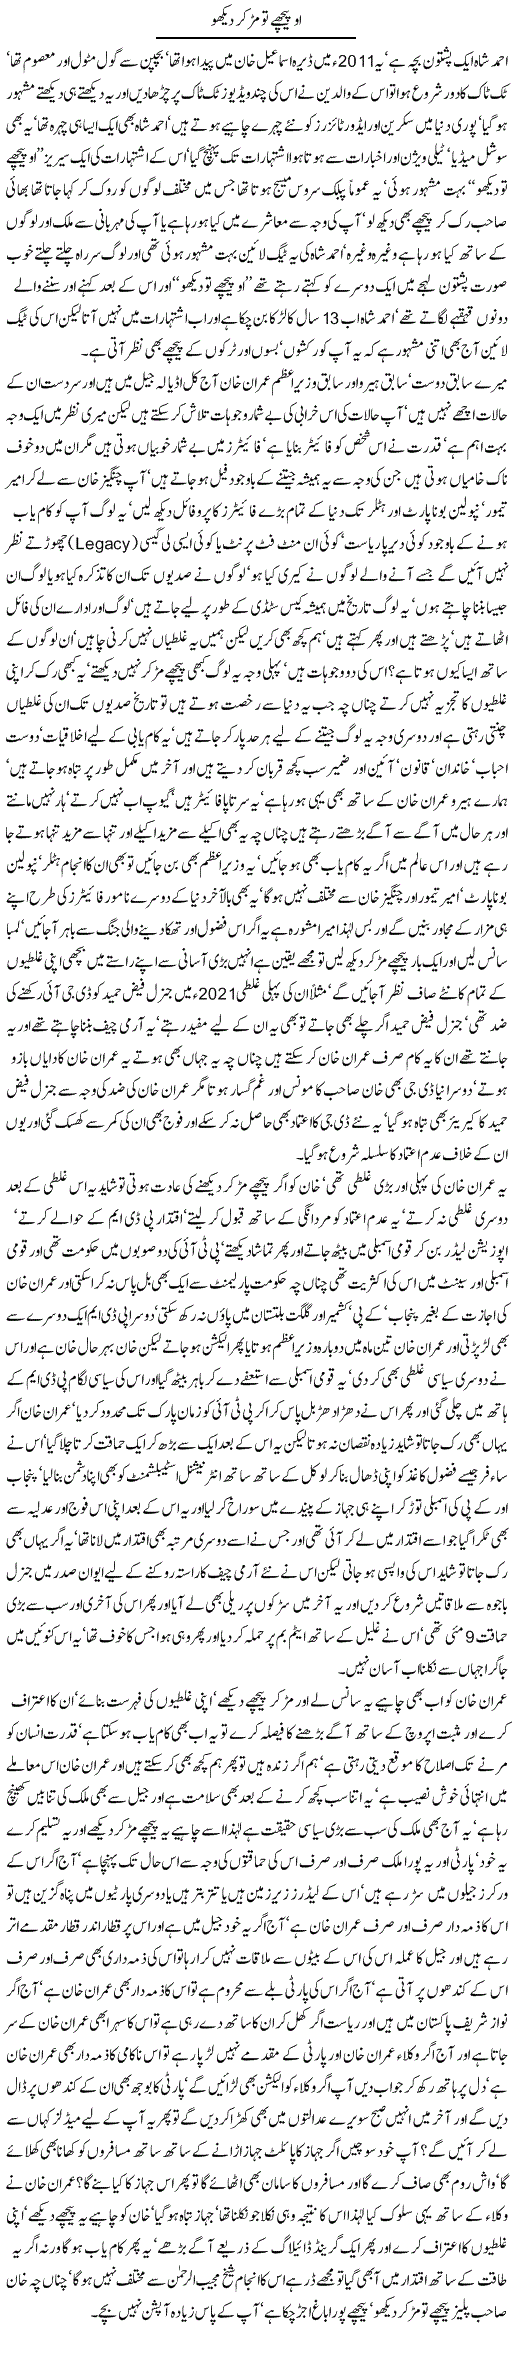 Javed Chaudhry Column About Political Mistakes of PTI Imran Khan